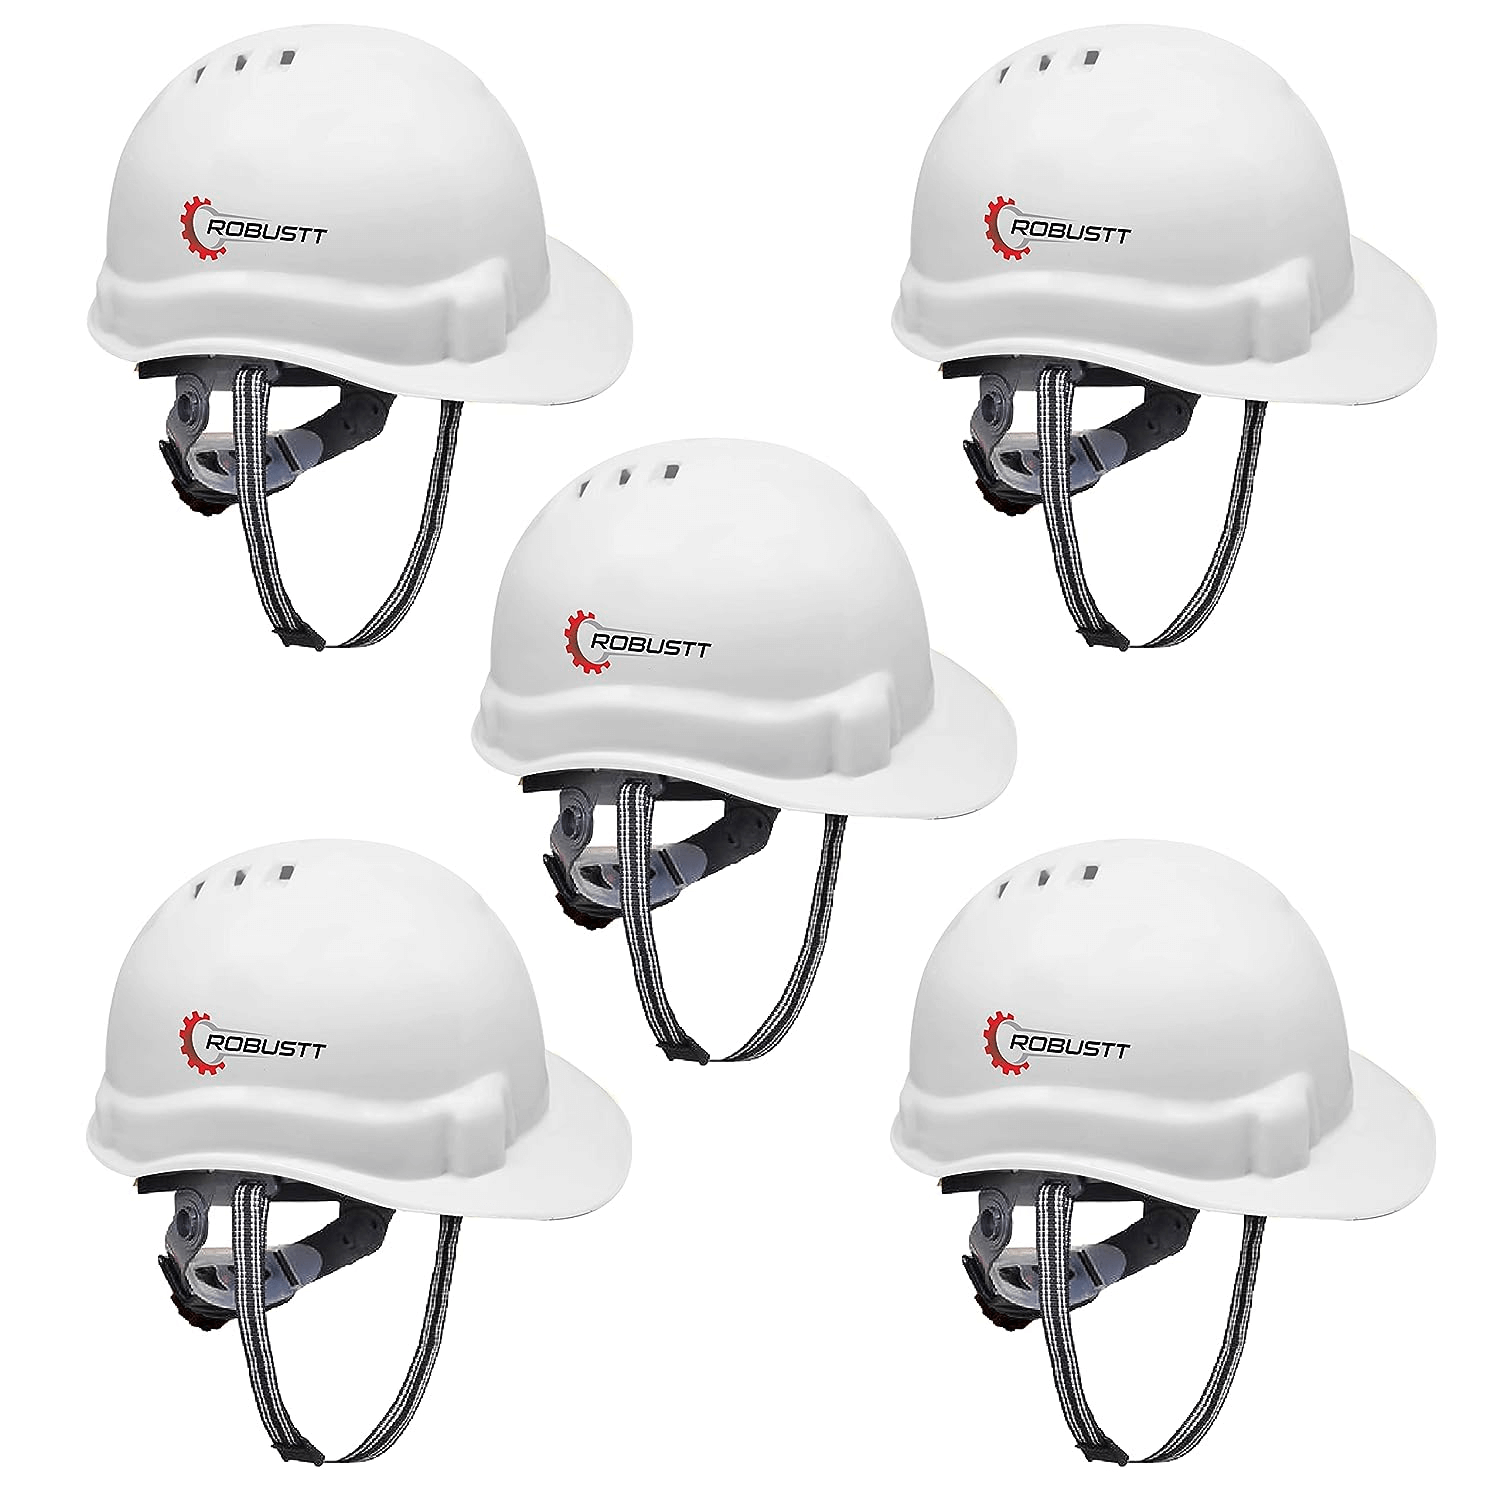 robustt-x-shree-jee-safety-helmet-executive-ratchet-type-adjustment-protection-for-outdoor-work-head-safety-hat-with-sweat-band-white-pack-of-5